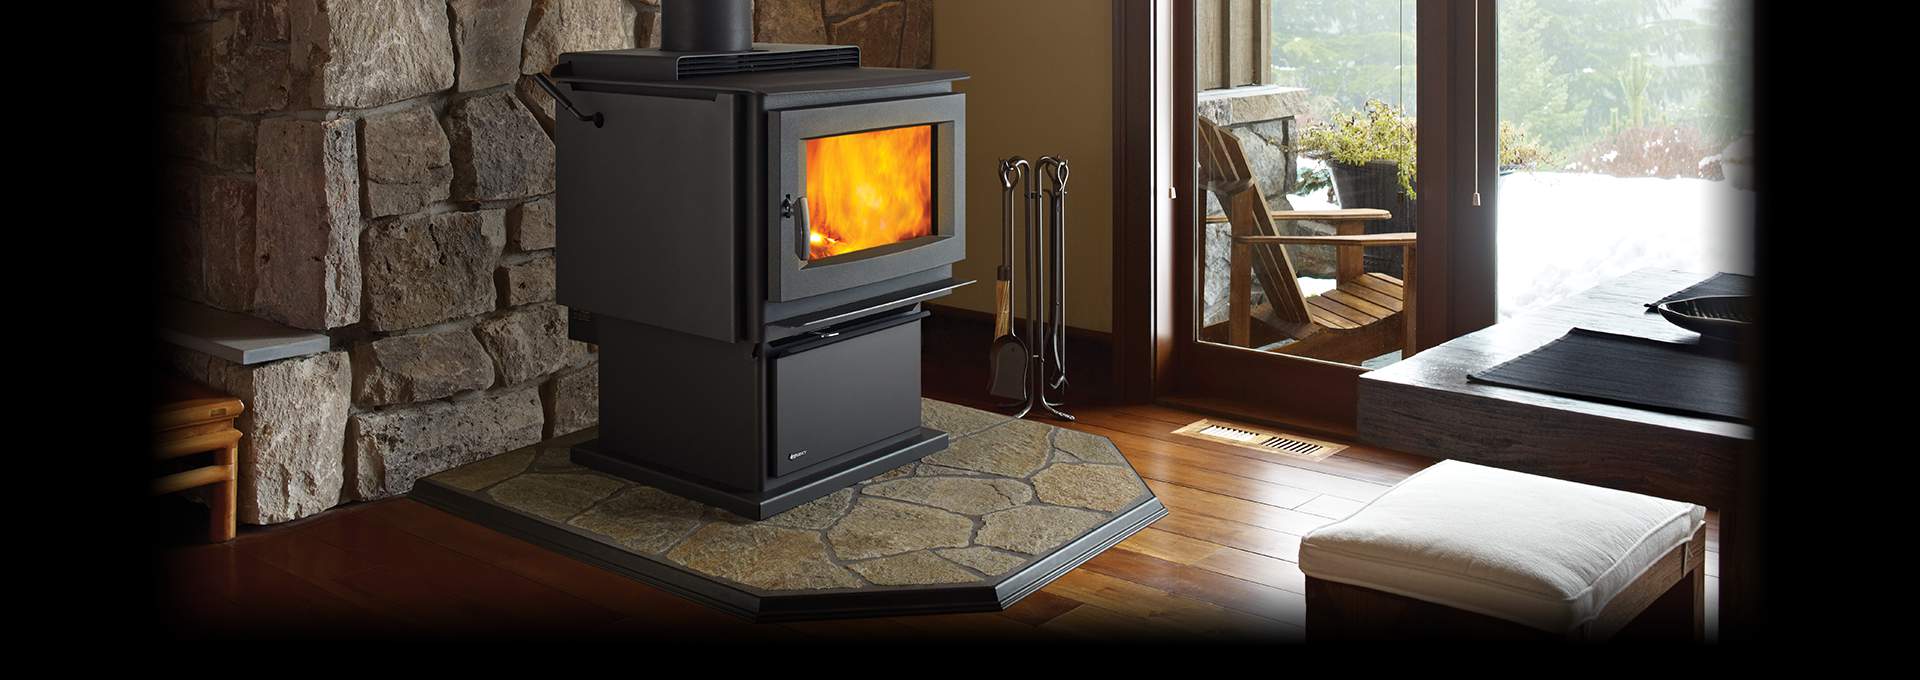 F5200 Hybrid Catalytic Wood Stove, Convert Wood Fireplace To Gas Australia